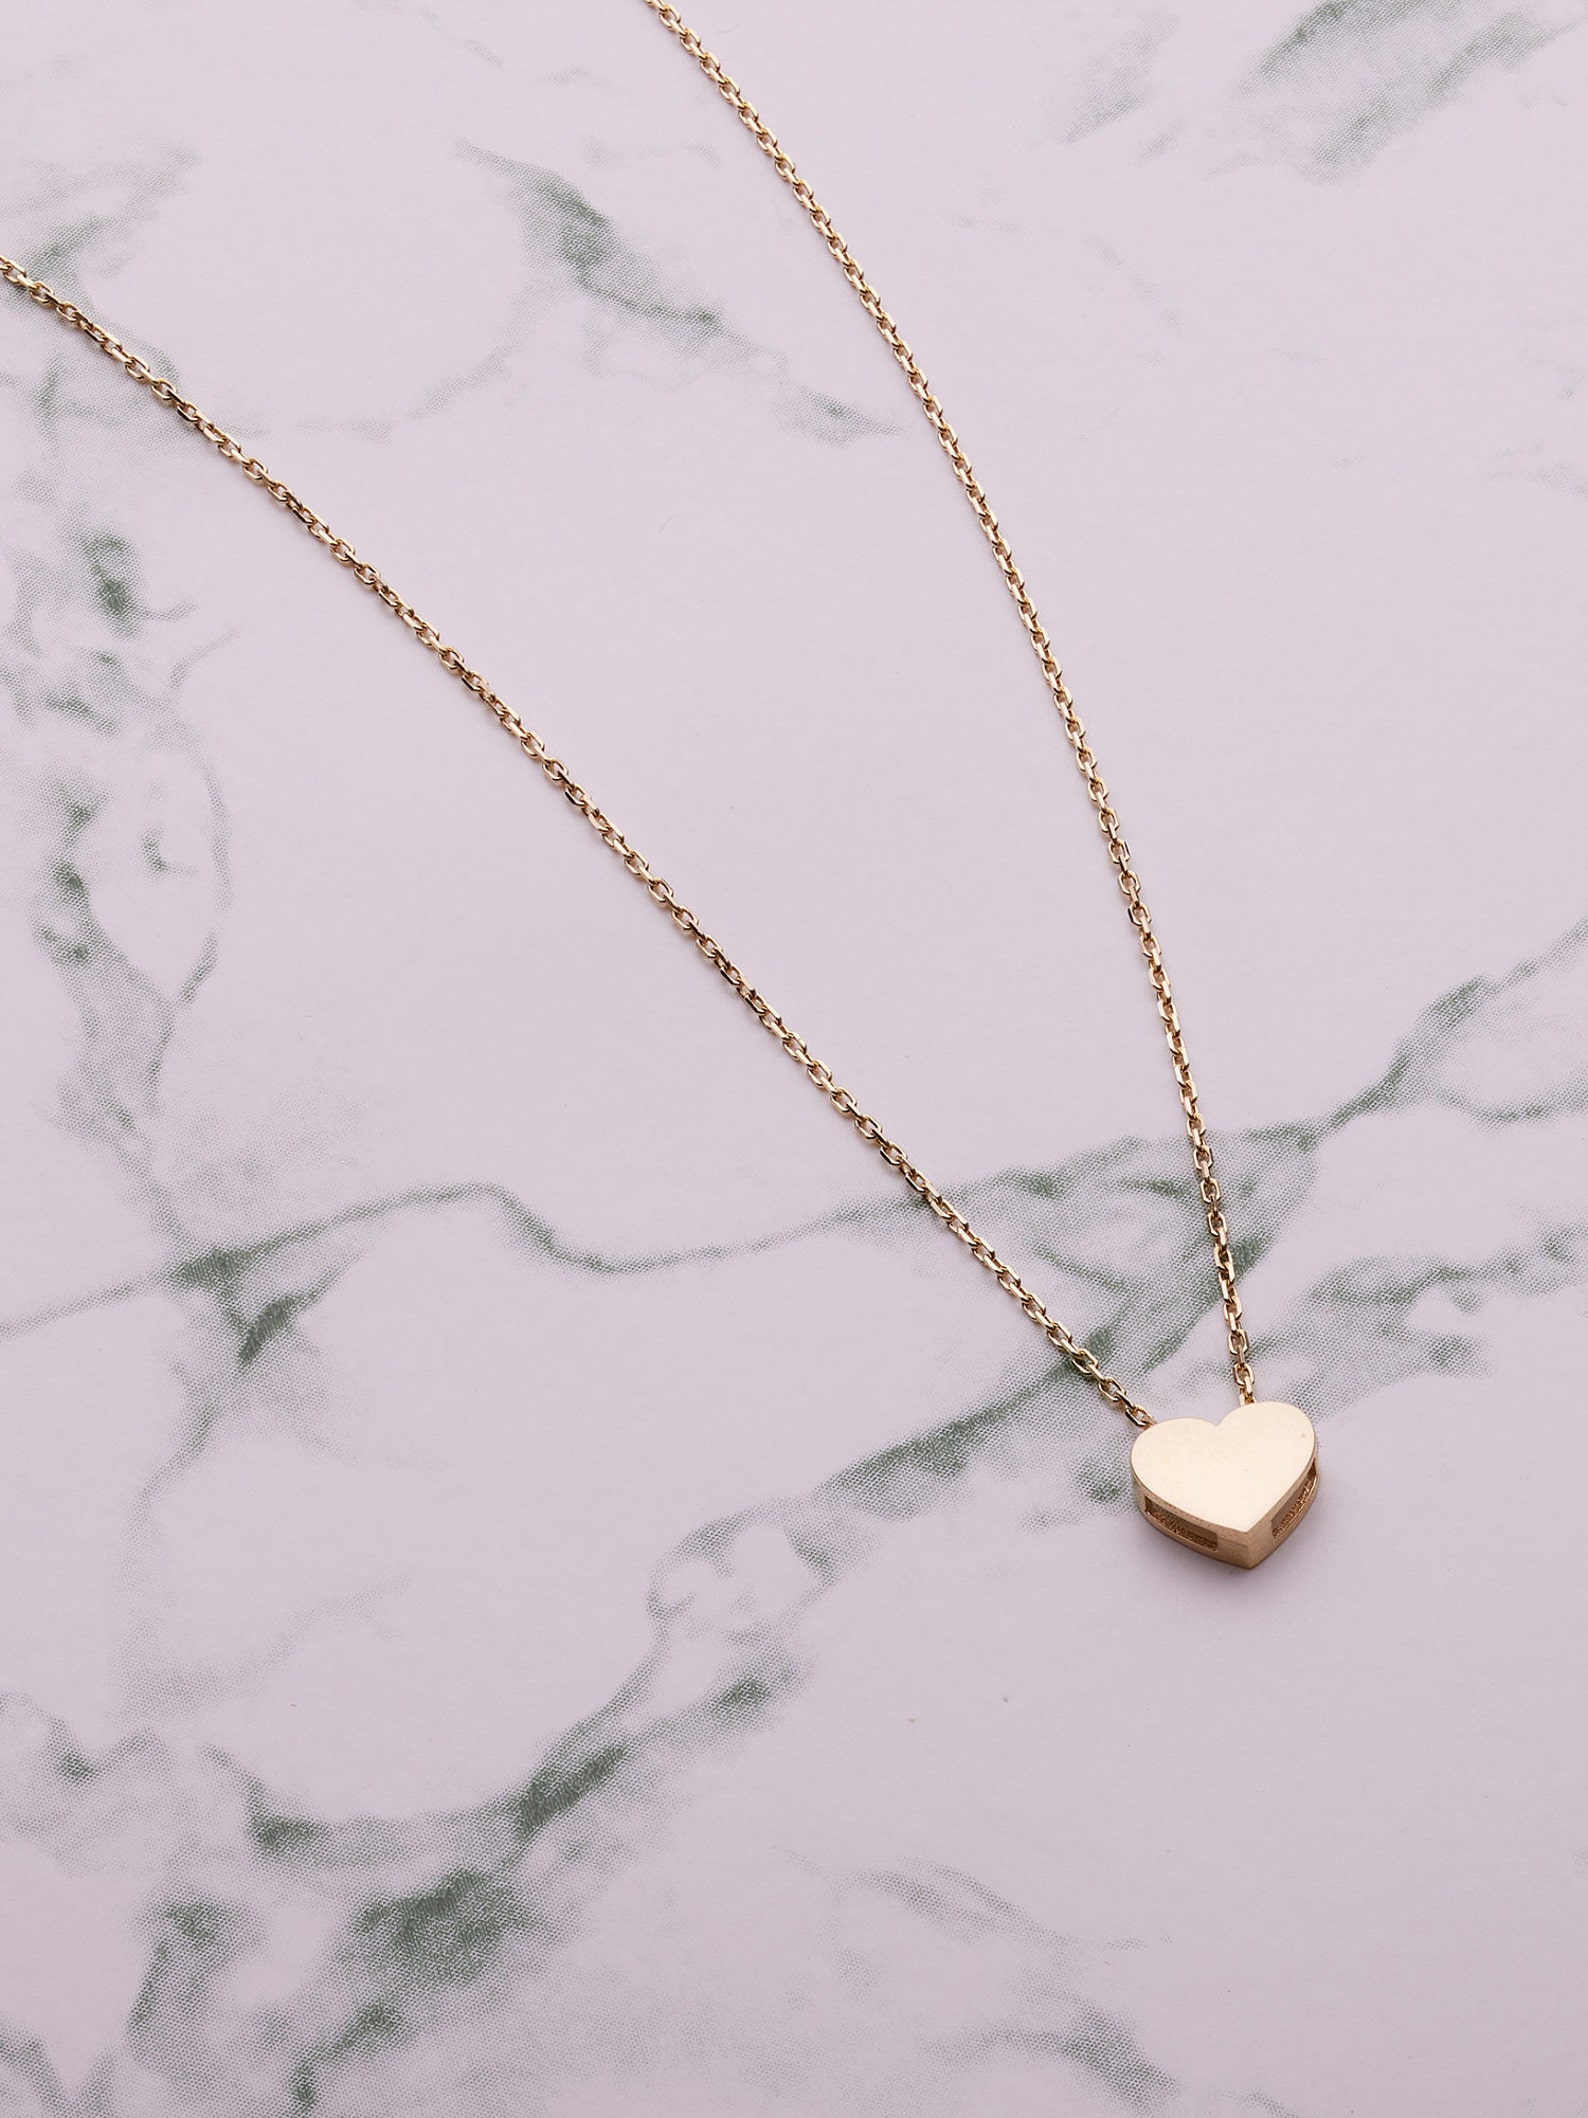 Tiny Heart Necklace Solid Gold Heart Necklace Small Gold - Etsy